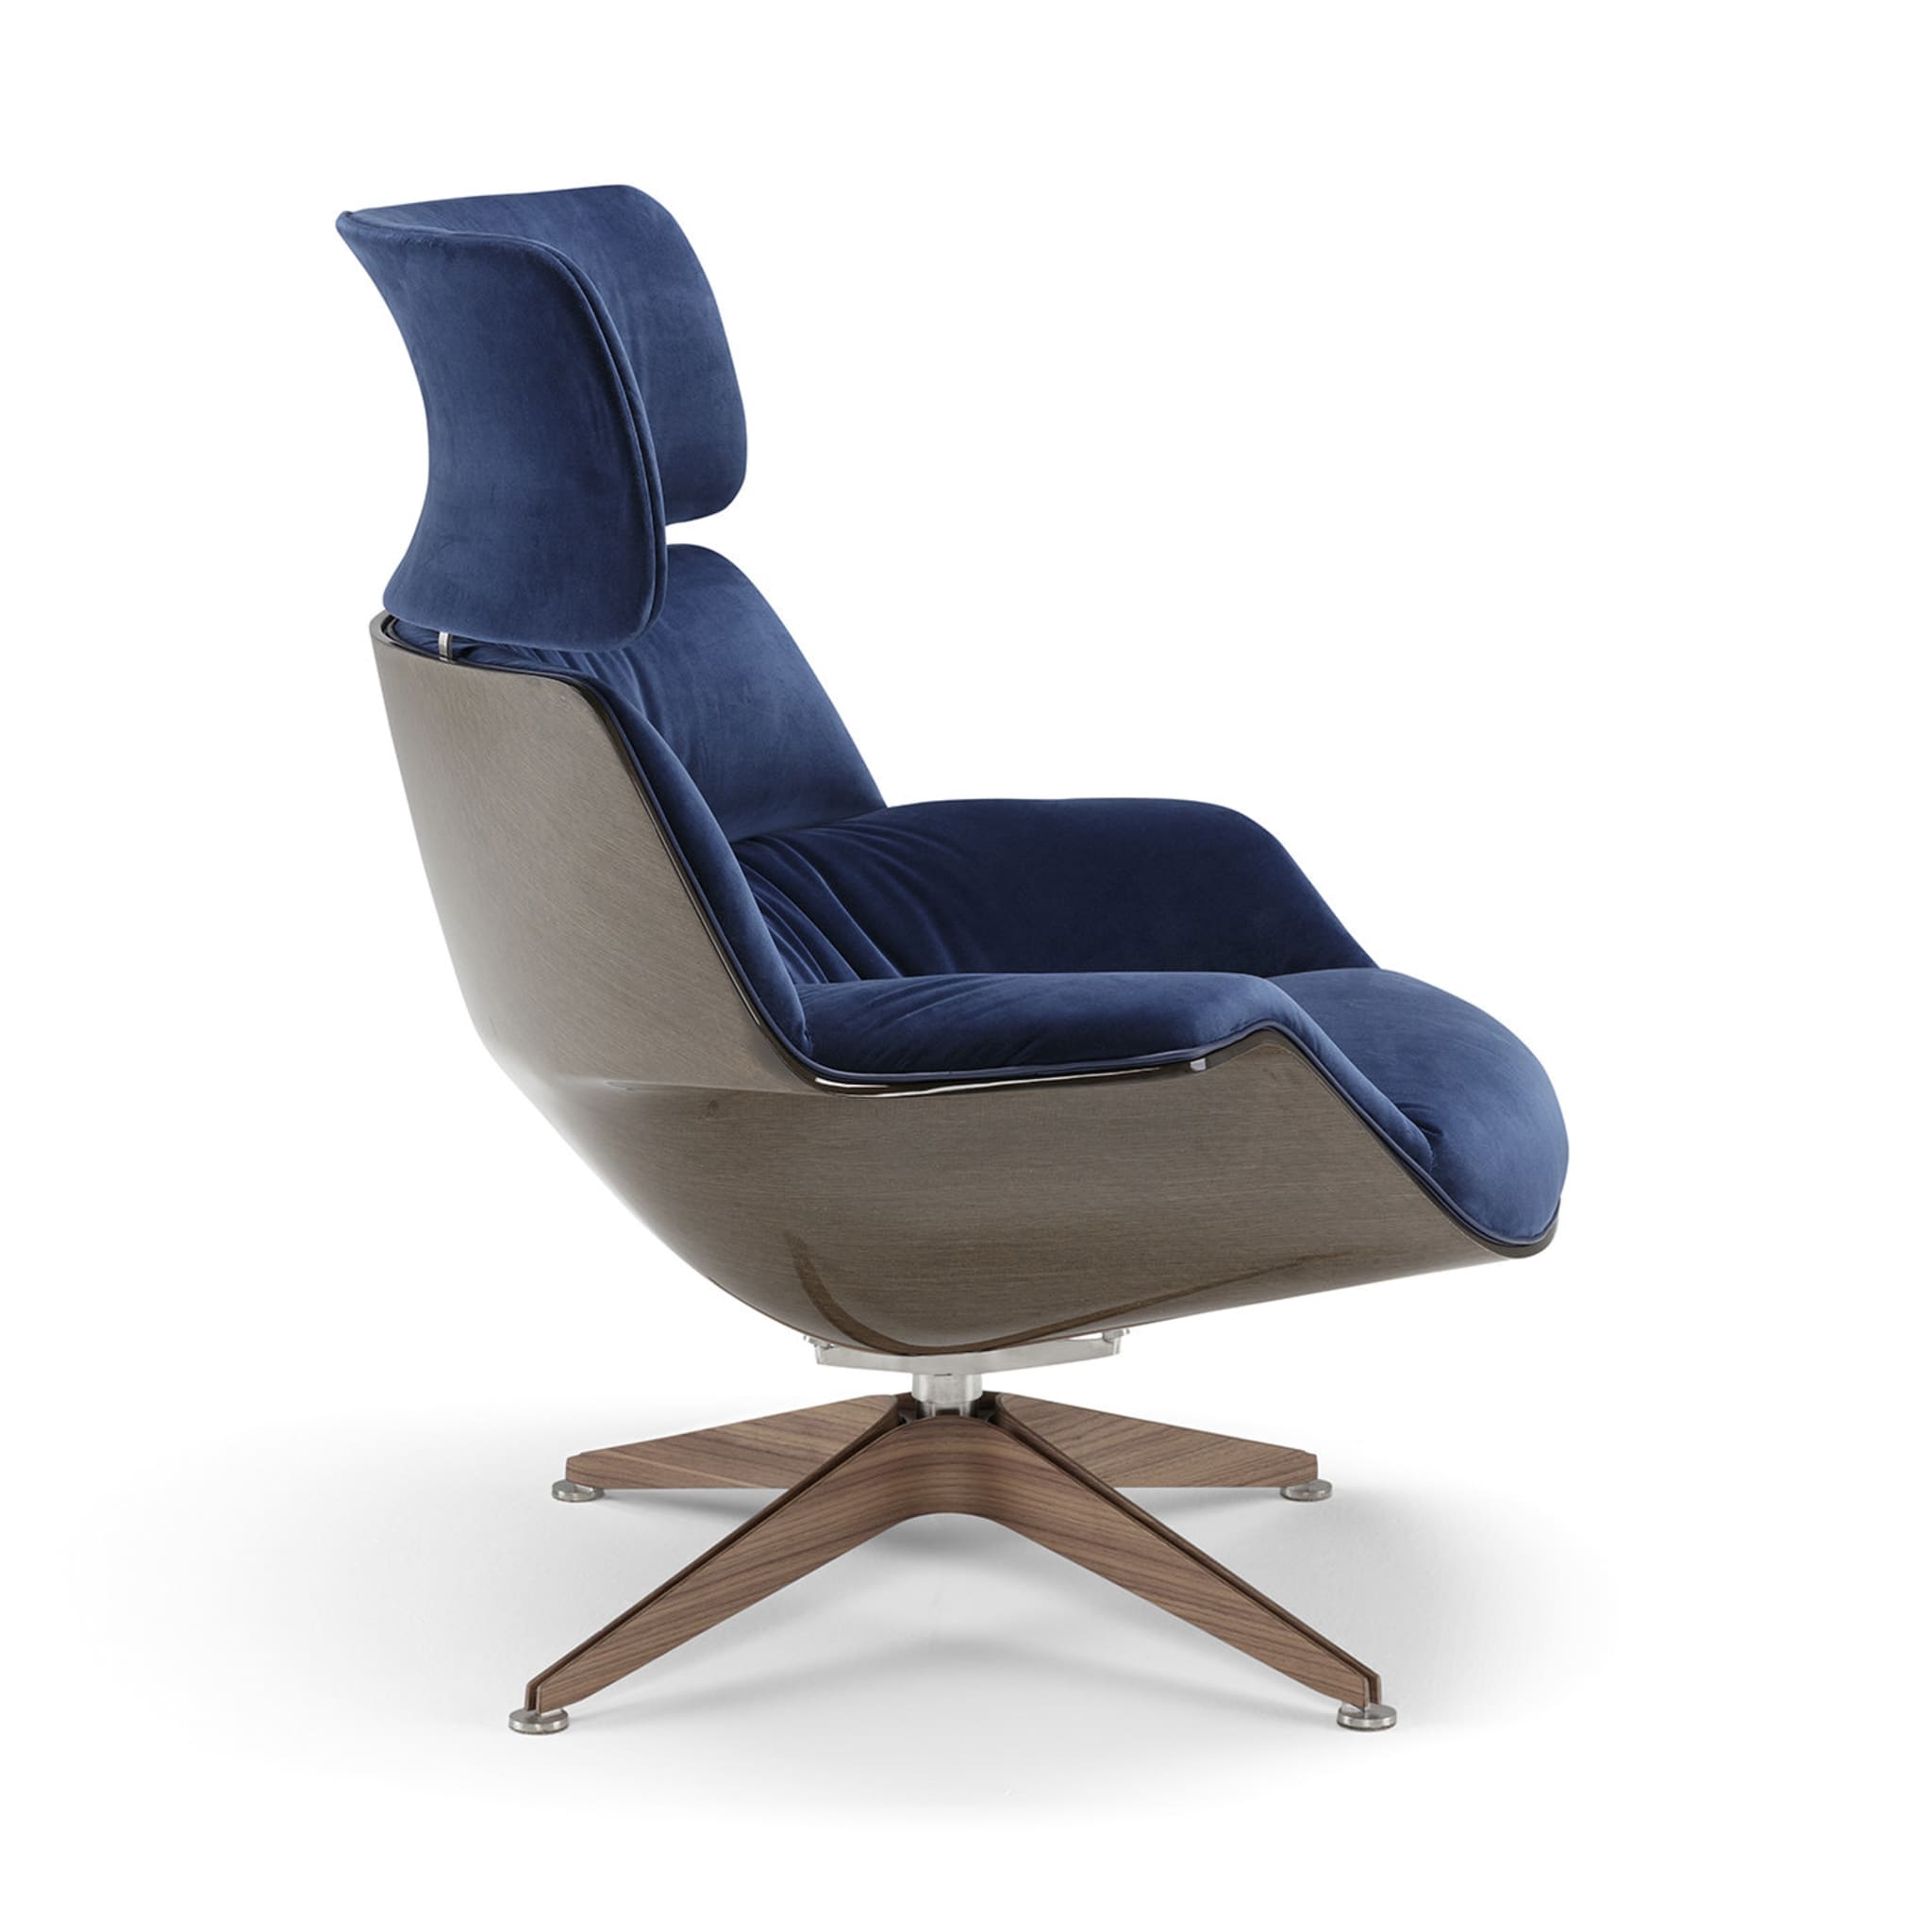 Coach Lounge Chair and Footrest by Jean Marie Massaud - Alternative view 3